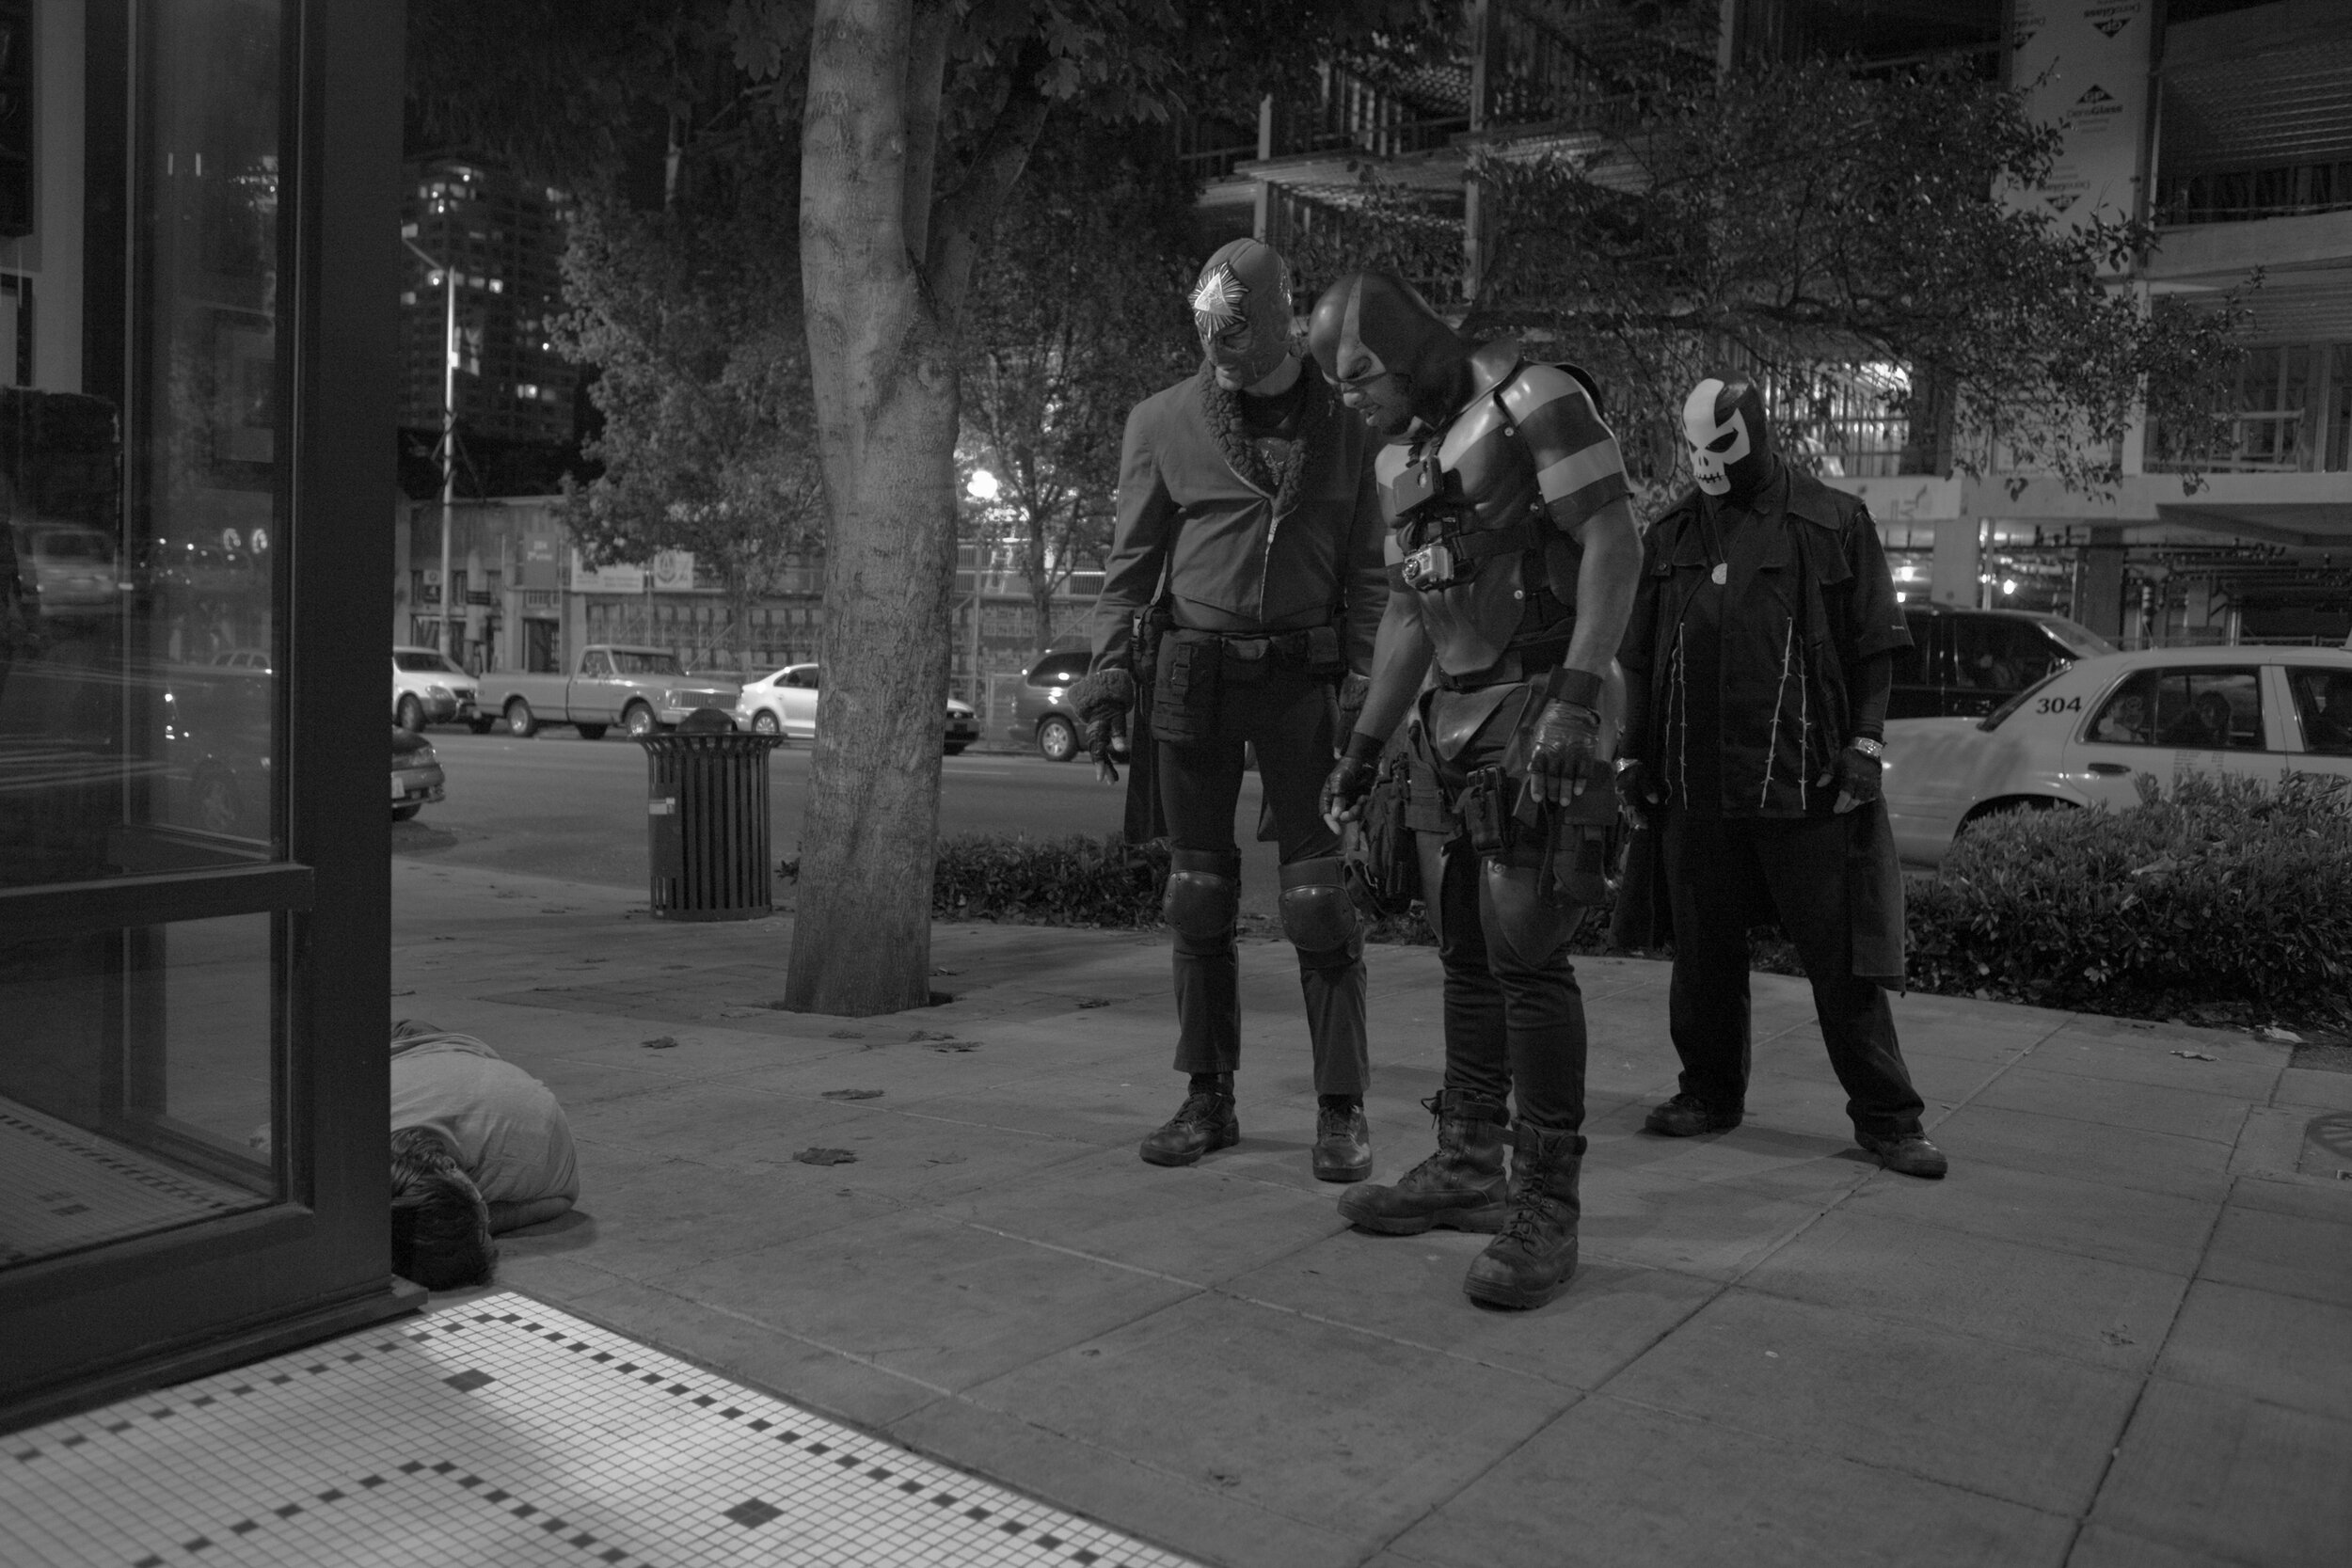  El Caballero, Phoenix Jones, and Westlake Drake look at a drunk man passed out on the street in Seattle, WA on Oct. 6, 2012. 